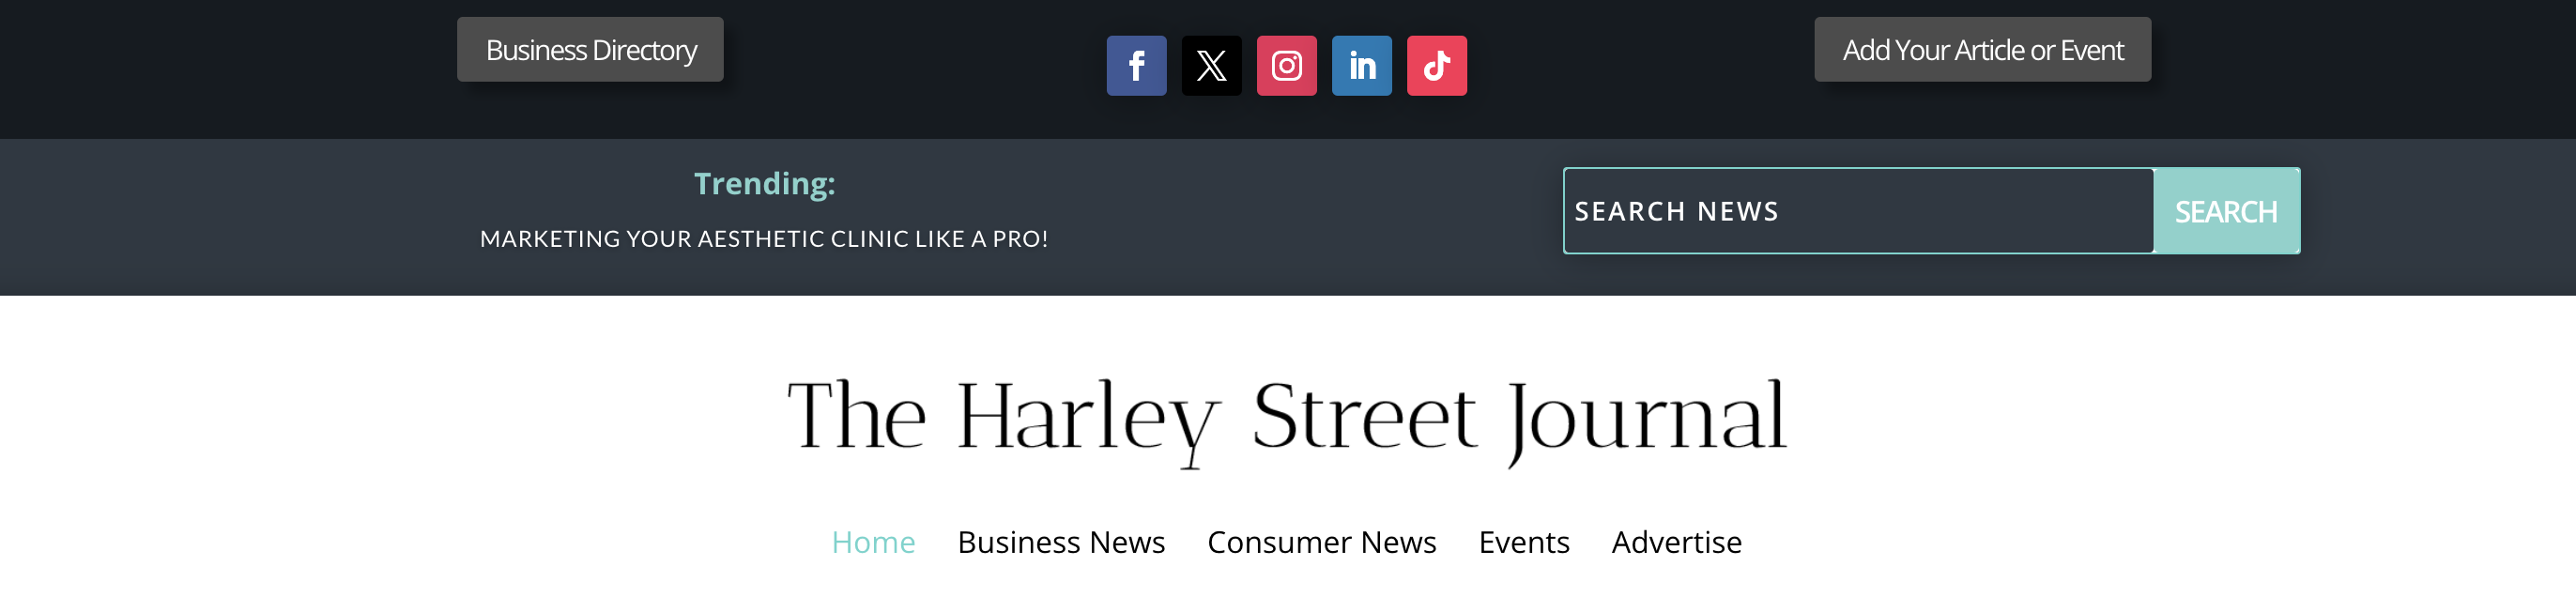 The Harley Street Journal contains features on industry news, new product launches, reviews, appointments and a comprehensive directory of key suppliers to the industry.